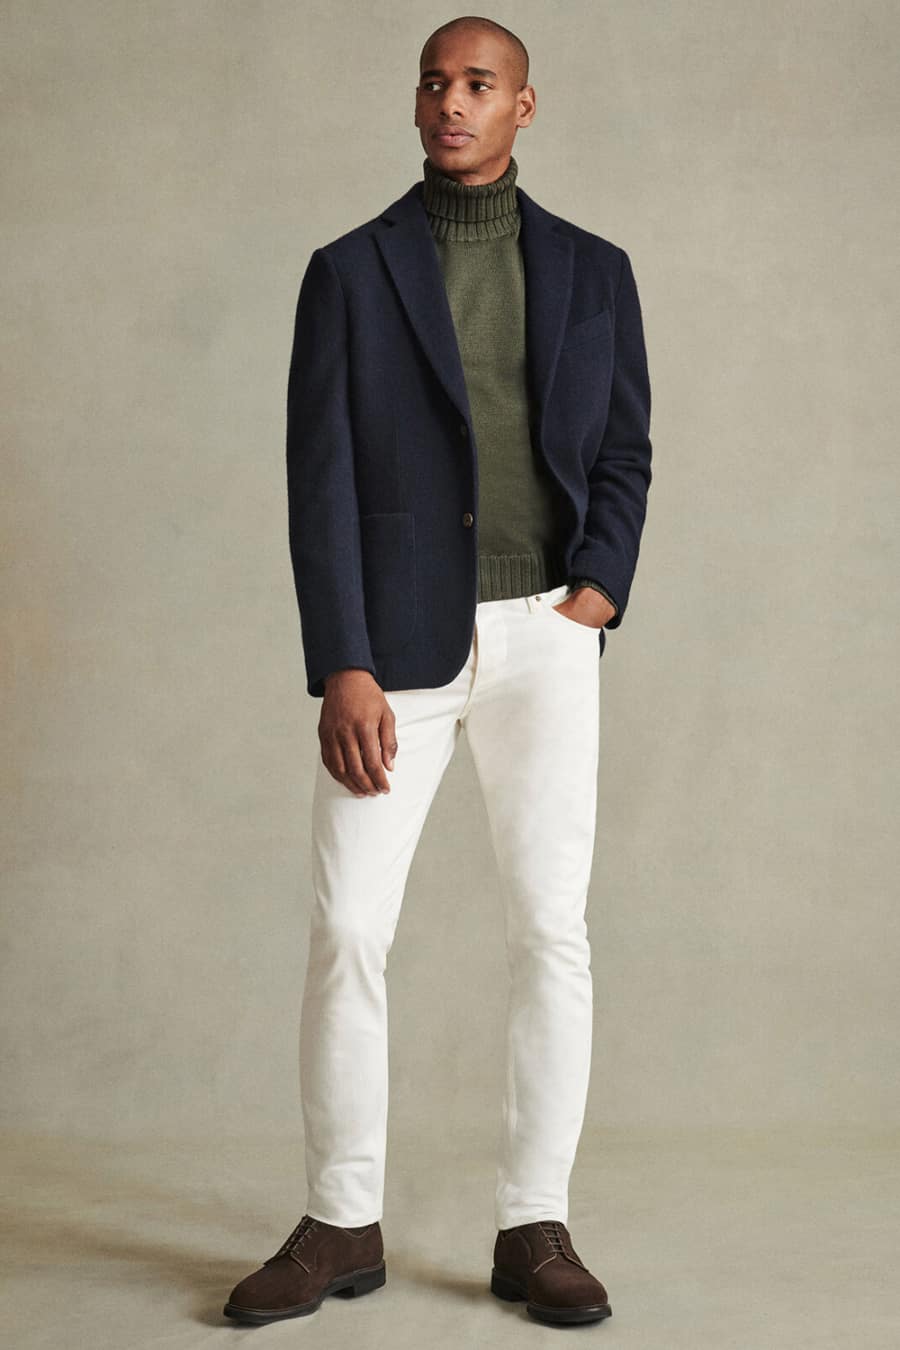 Men's white jeans, green roll neck, navy wool blazer and brown shoes outfit